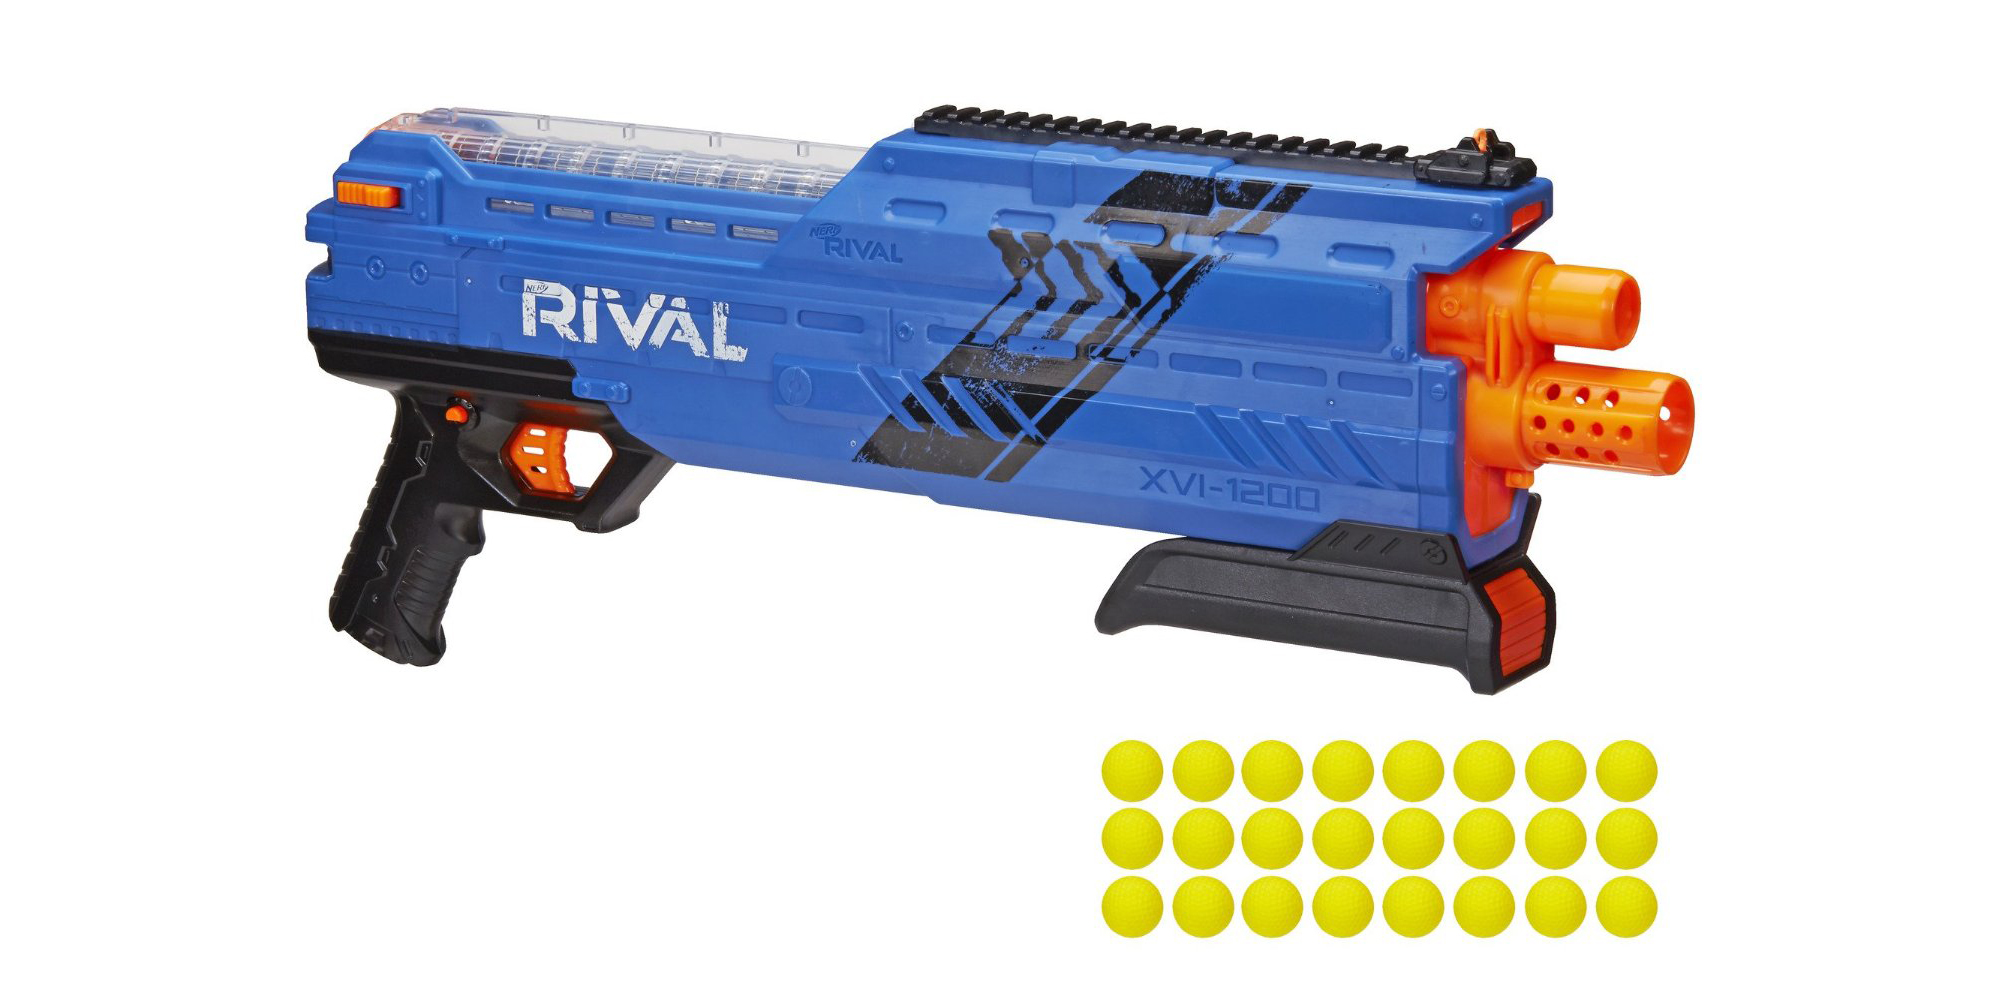 At $28 Prime shipped, this Nerf Rival Blaster is a must-have (Reg. $40)